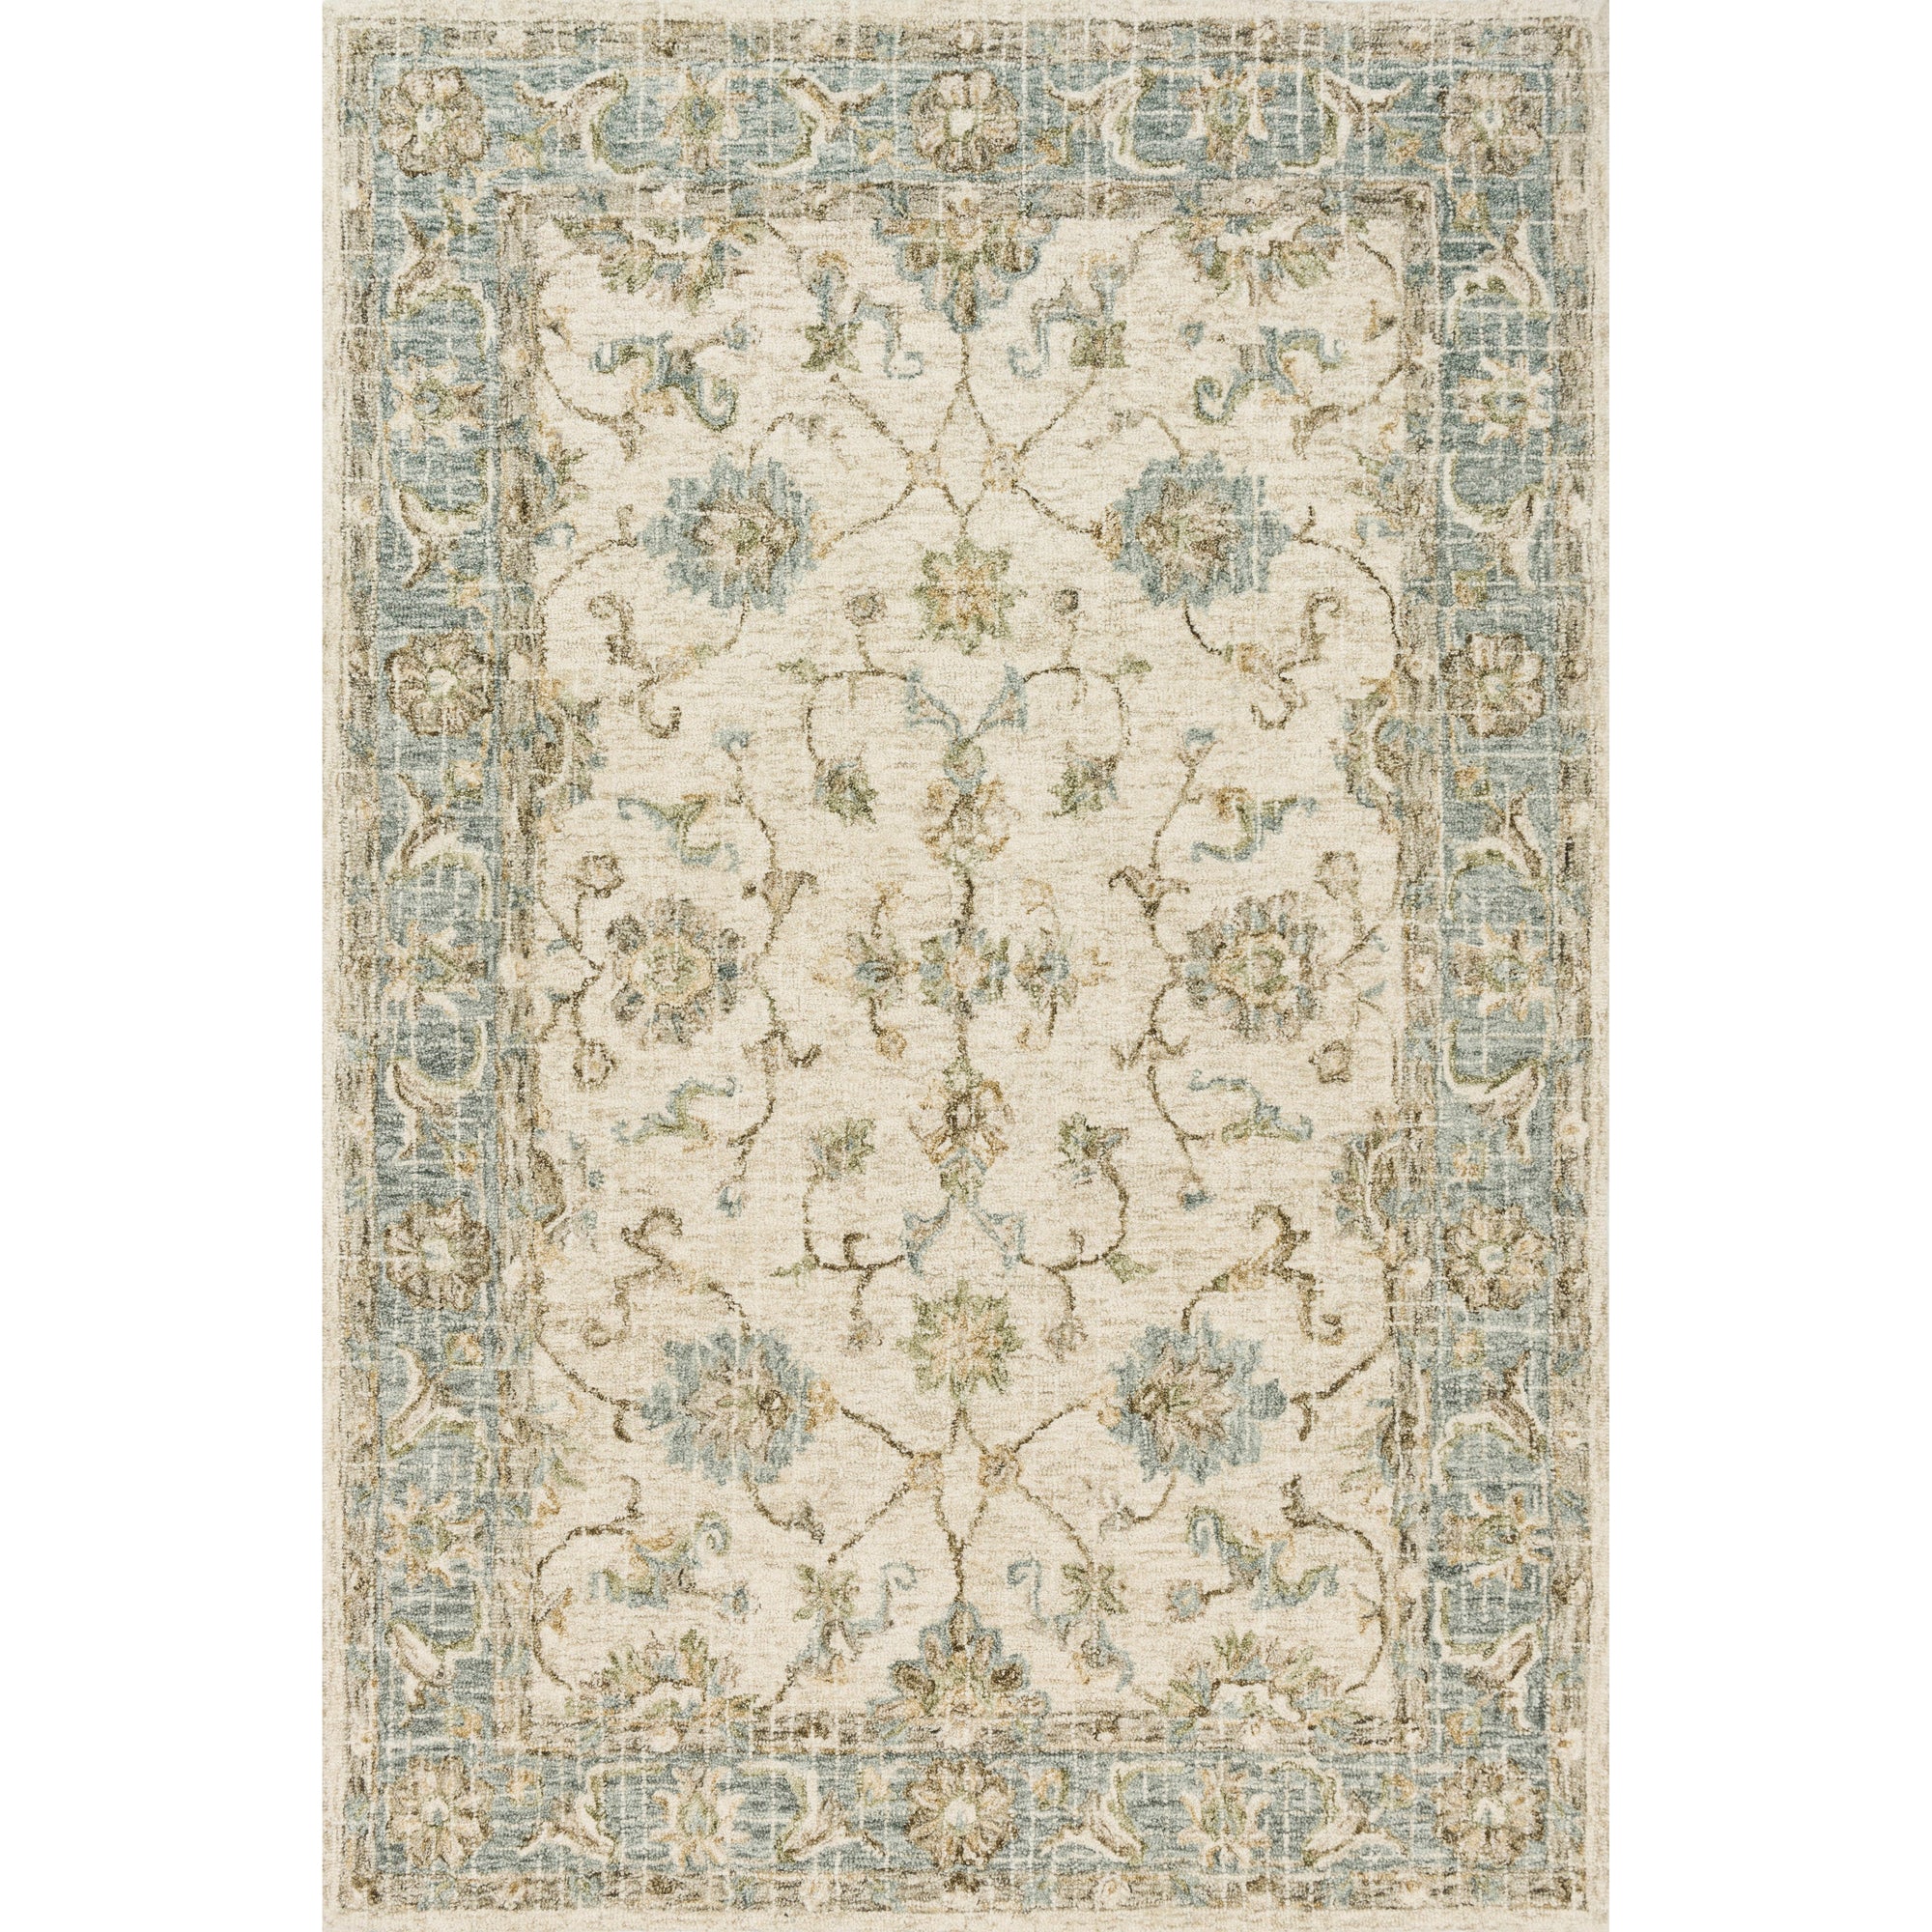 Rugs by Roo Loloi Julian Ivory Spa Area Rug in size 18" x 18" Sample